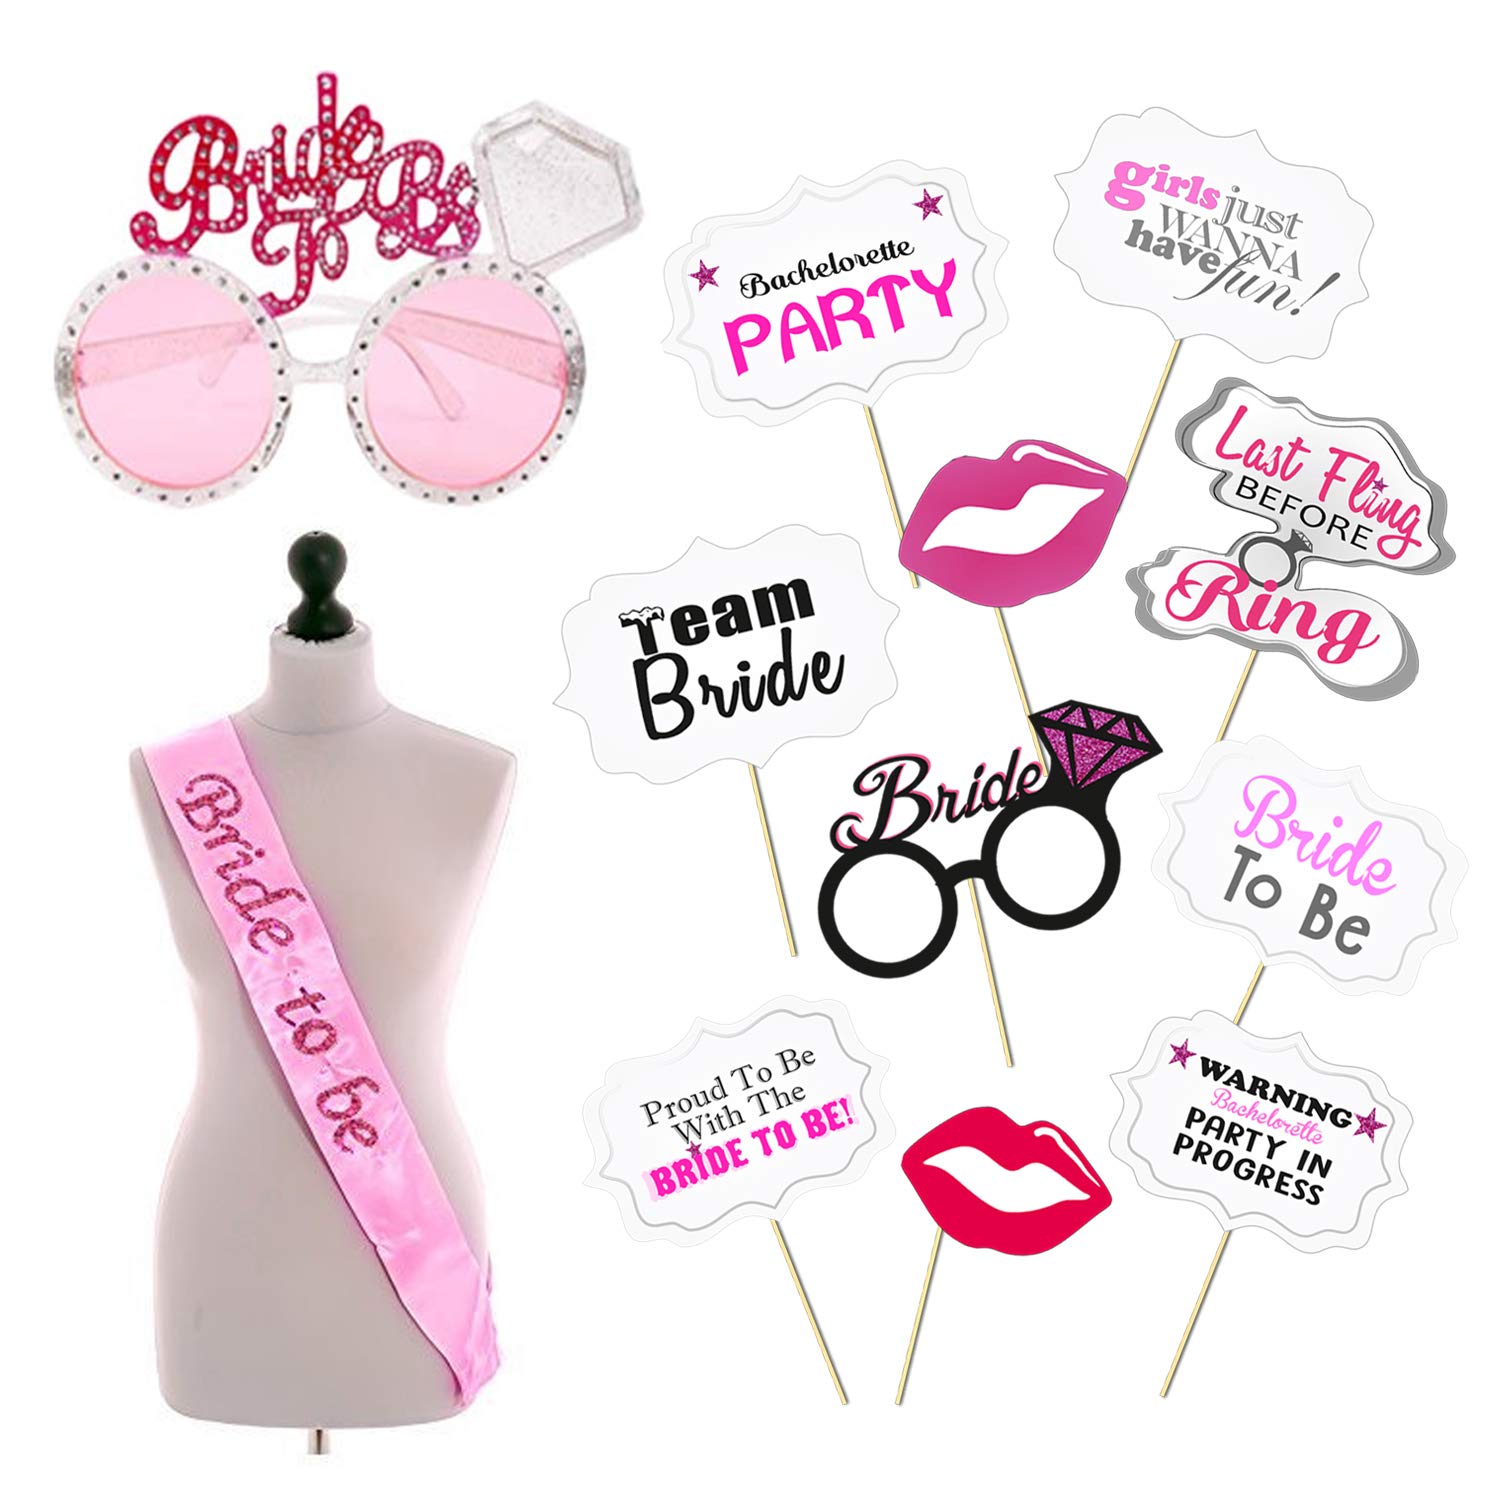 Bride to Be Props / Party Props